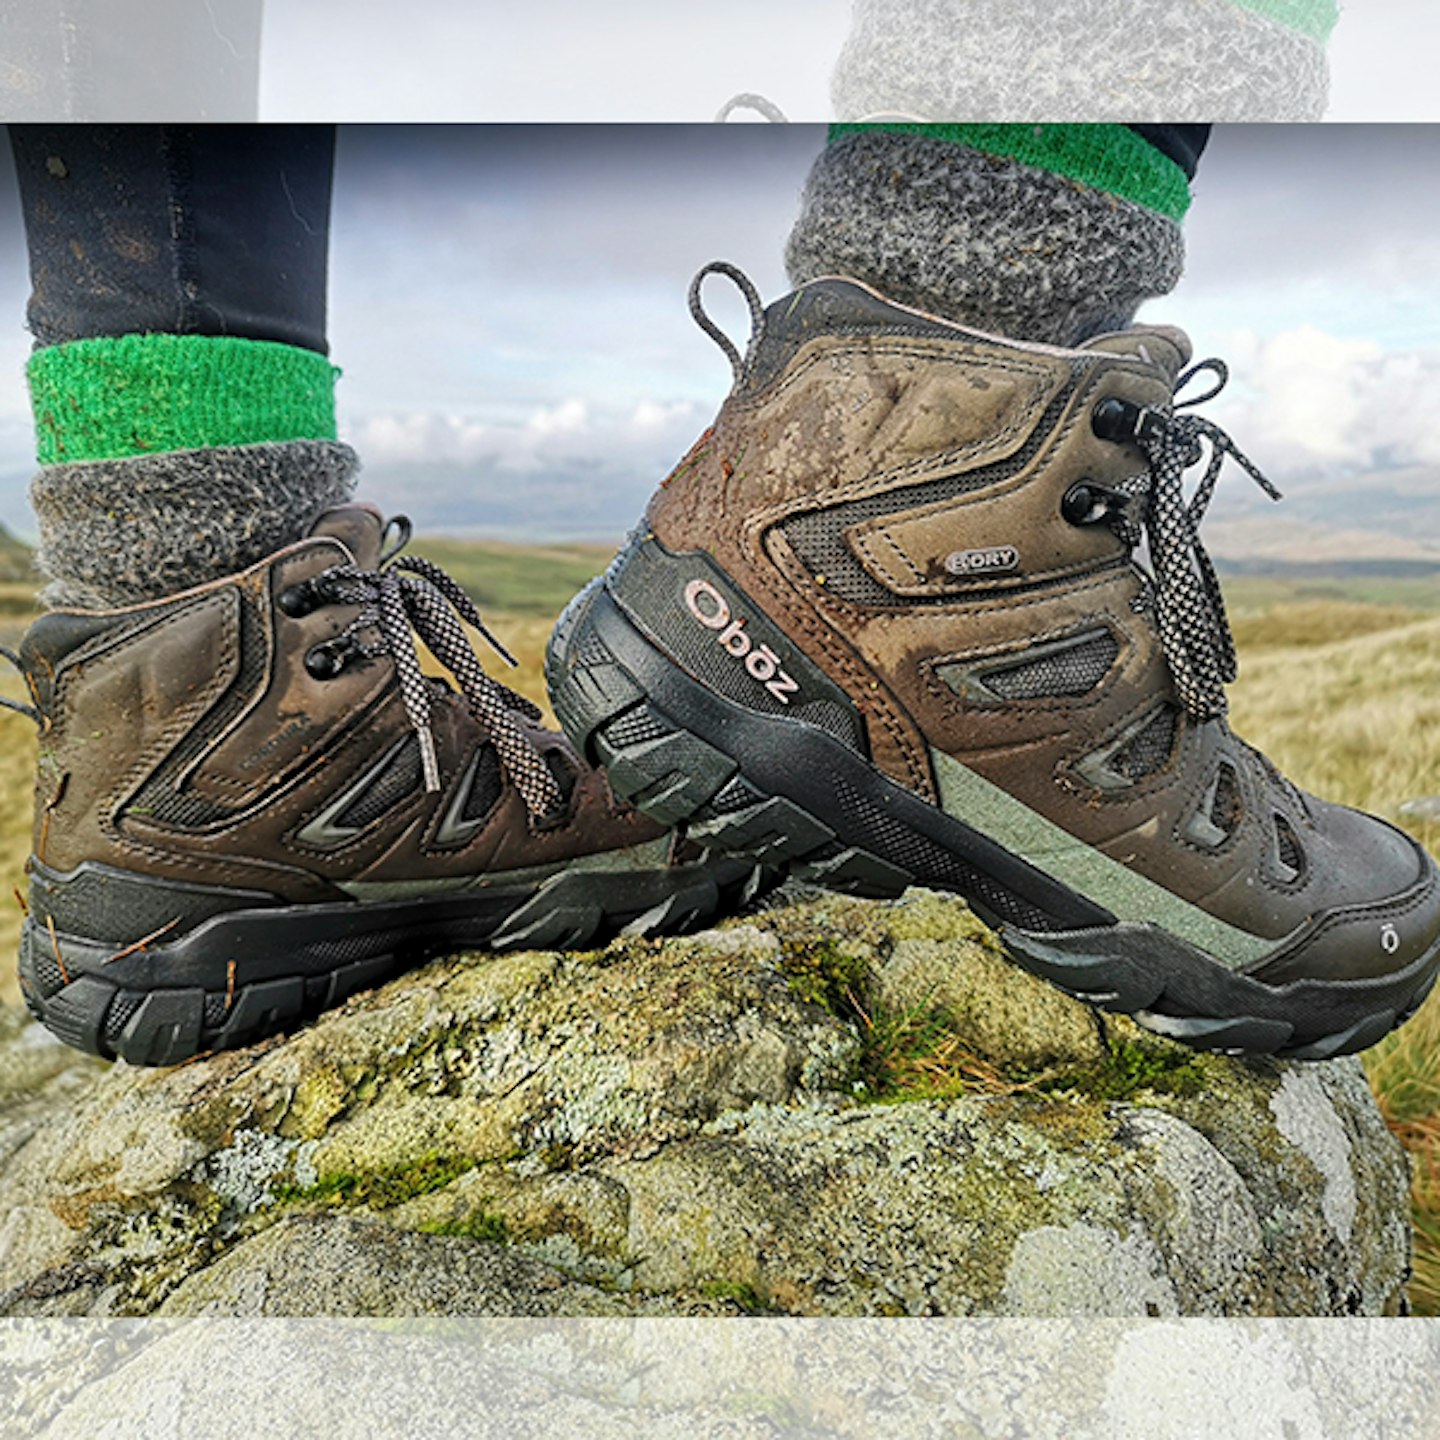 The Best 3 Season Walking Boots Reviewed | Hiking | live for the outdoors